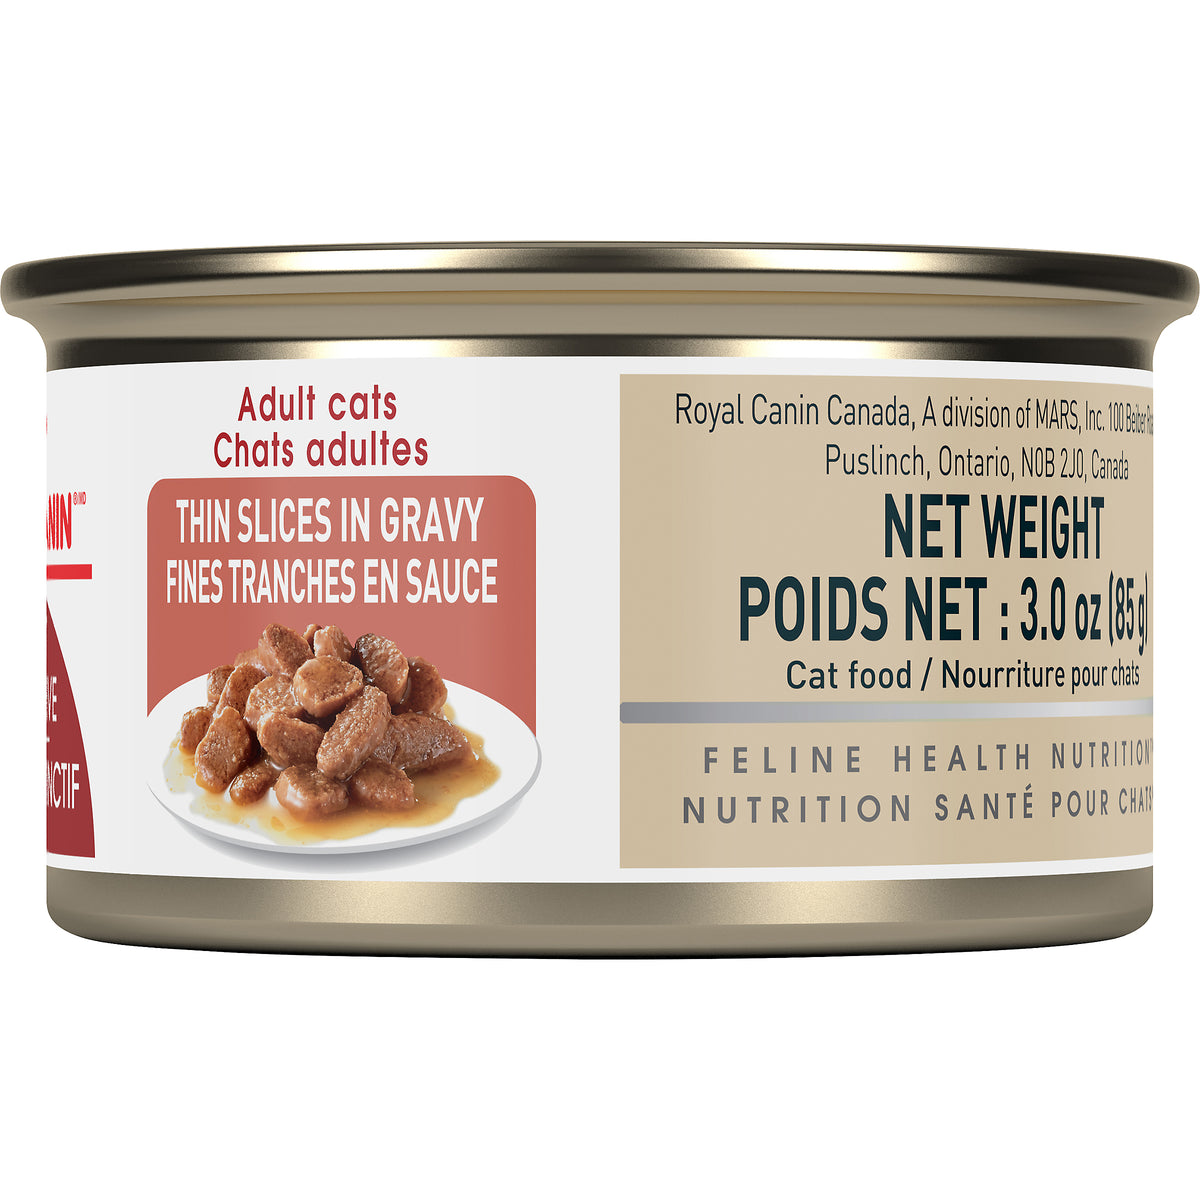 Royal Canin Adult Instinctive (Thin Slices in Gravy) - Wet Canned cat food